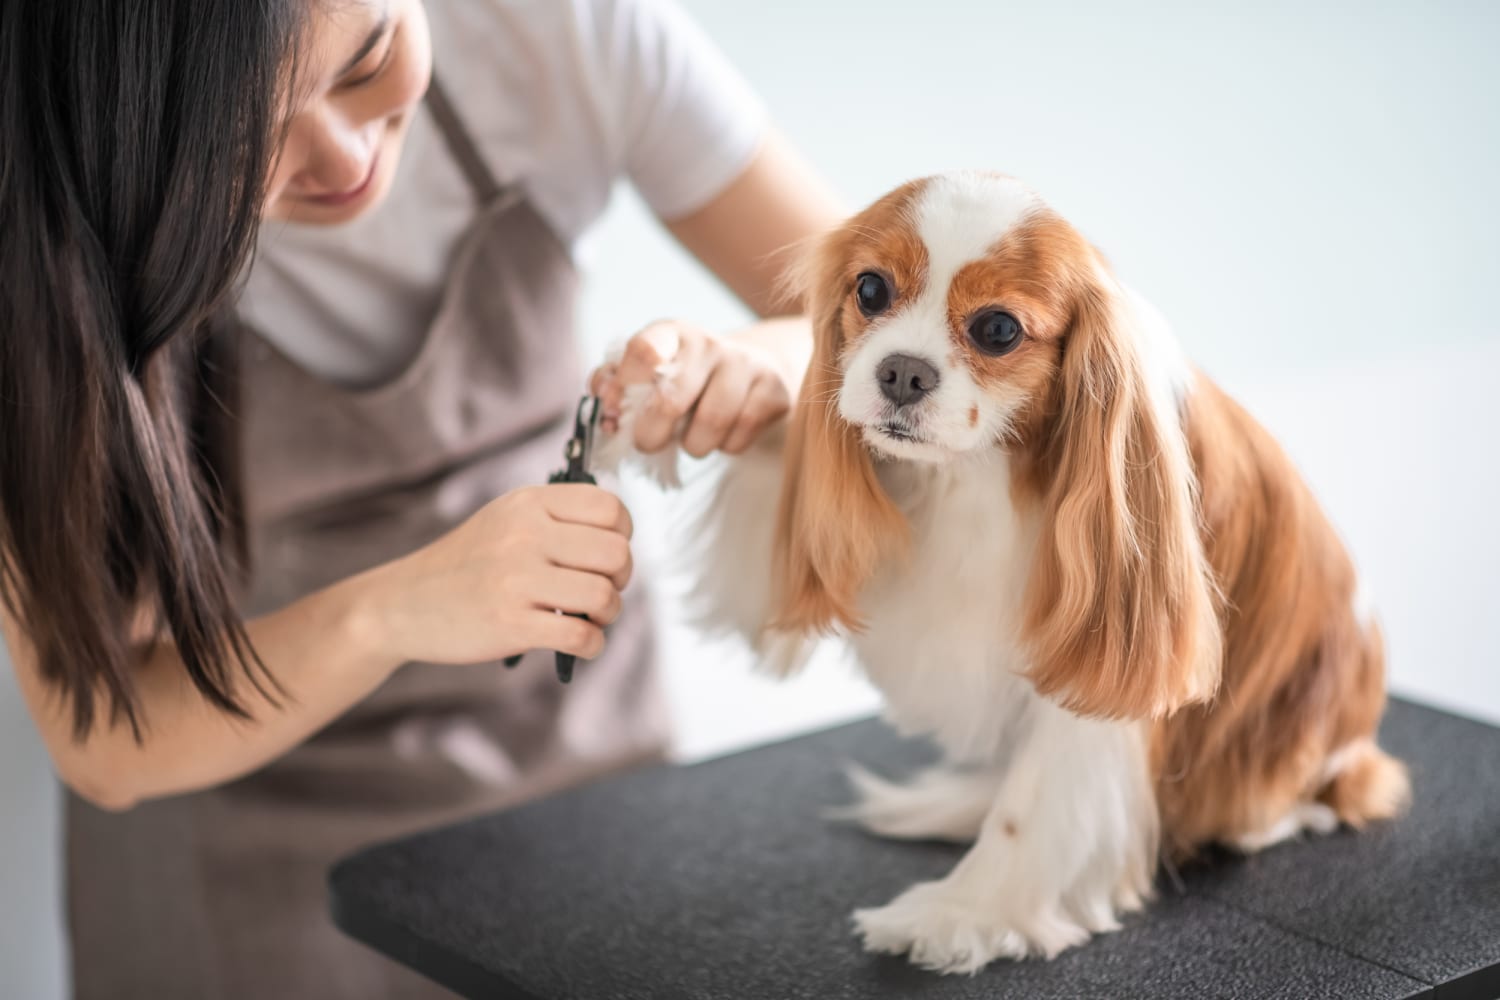 7 dog nail clippers to shop in 2023, according to experts